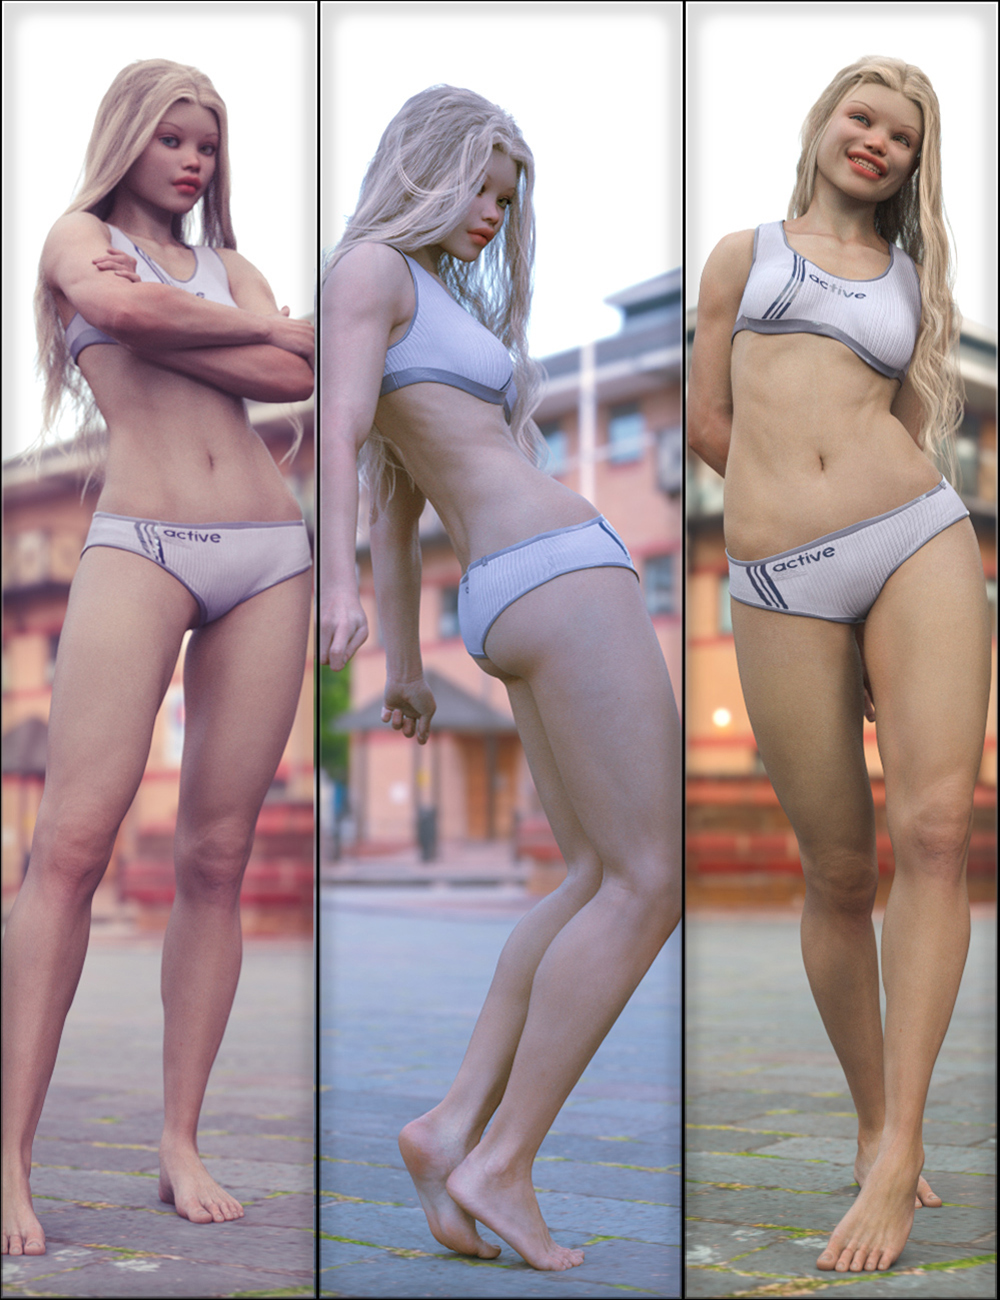 Charming Standing Poses Vol. 3 for Genesis 8 and 8.1 Females